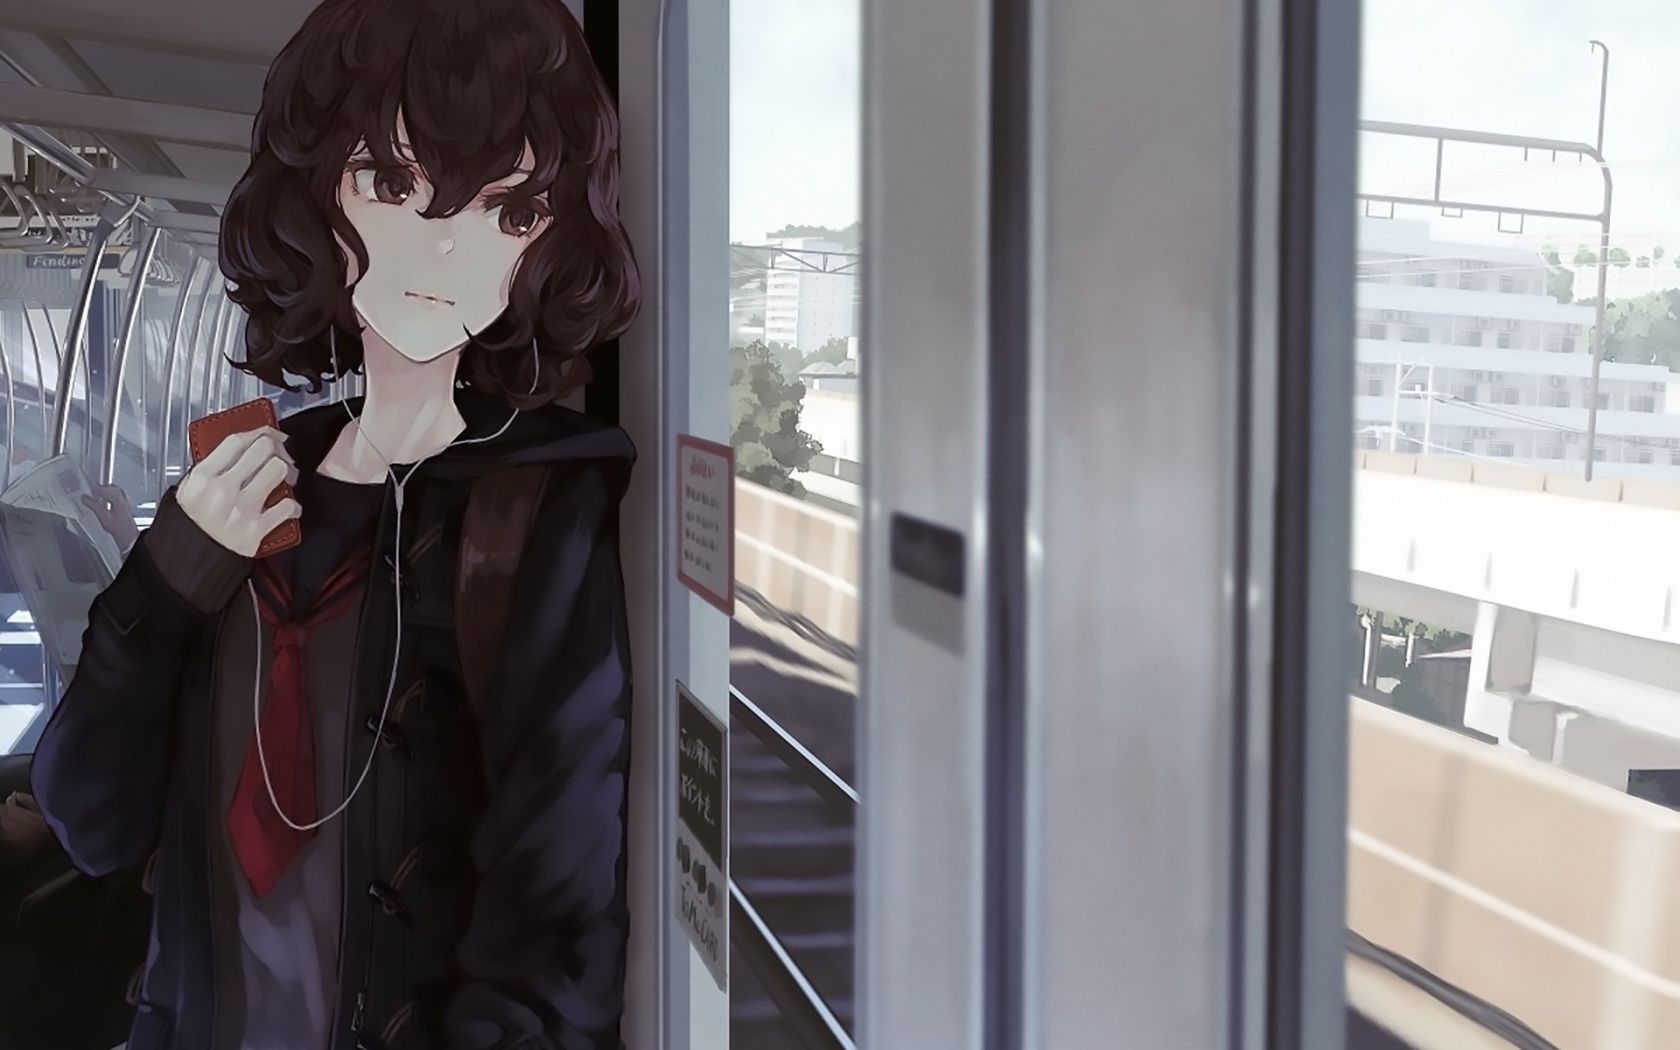 Desktop Wallpaper Short, Curly Hair, Anime Girl, Train, HD Image, Picture, Background, C54ee1